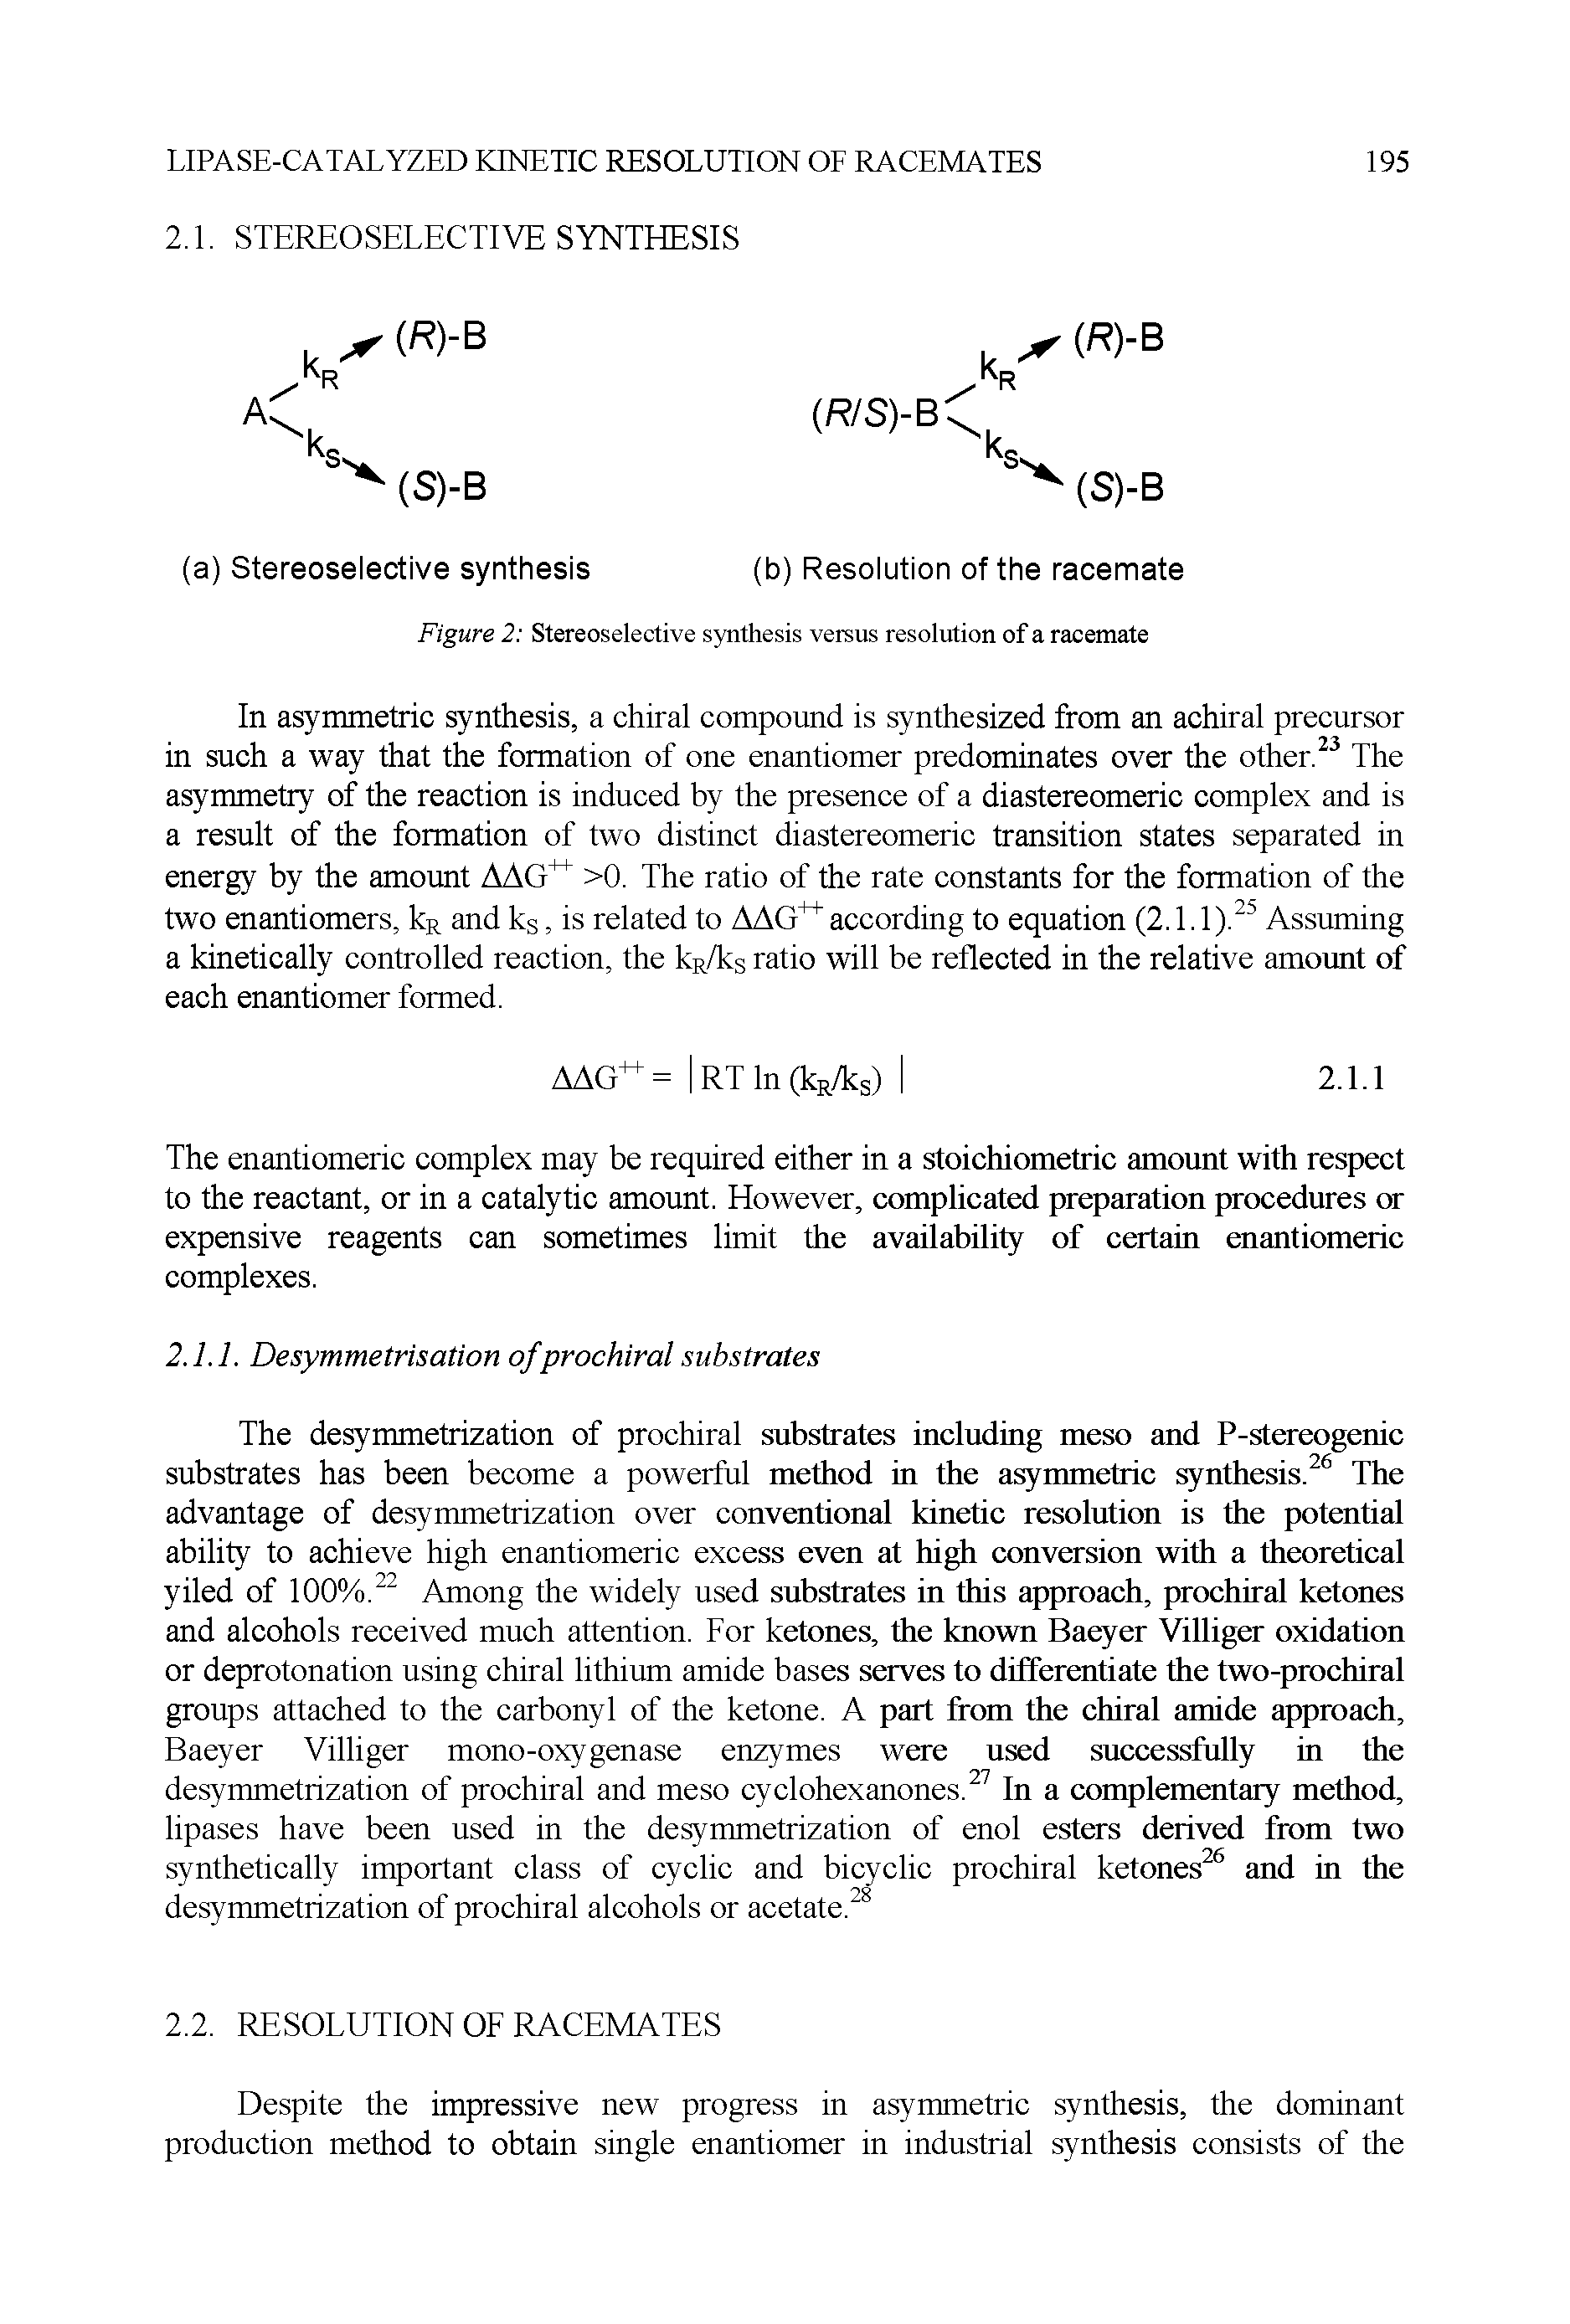 Figure 2 Stereoselective synthesis versus resolution of a racemate...